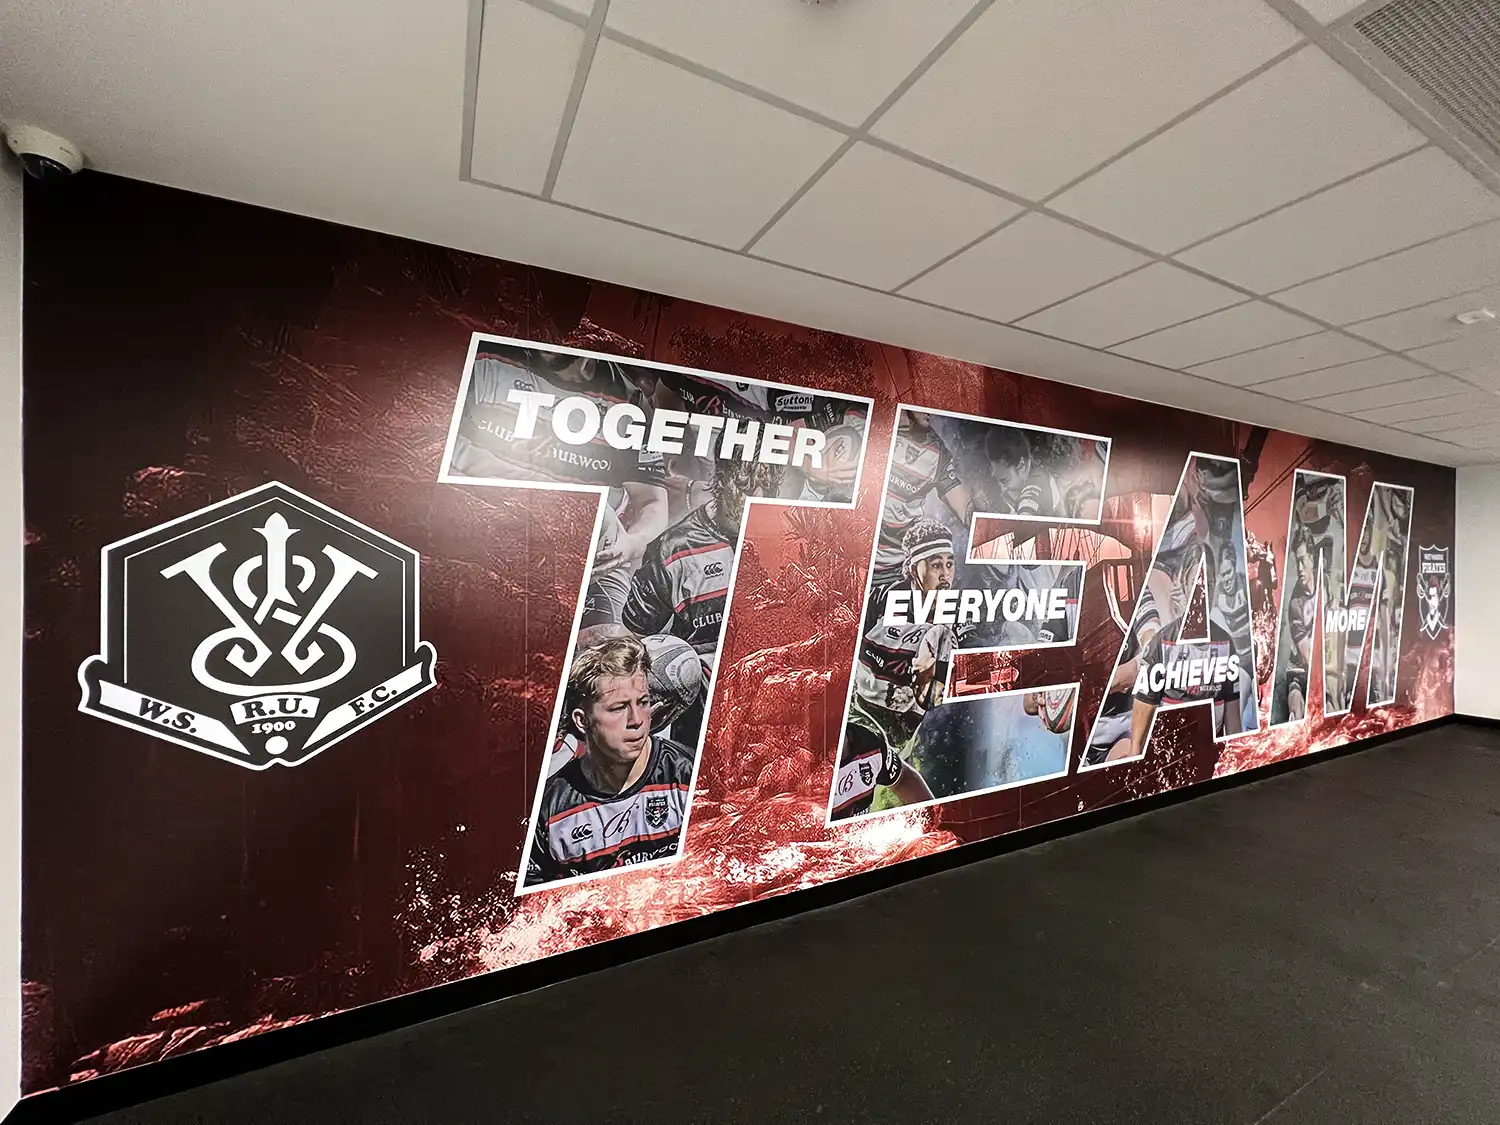 Gym Wall signage titled TEAM - Together Everyone Achieves More.